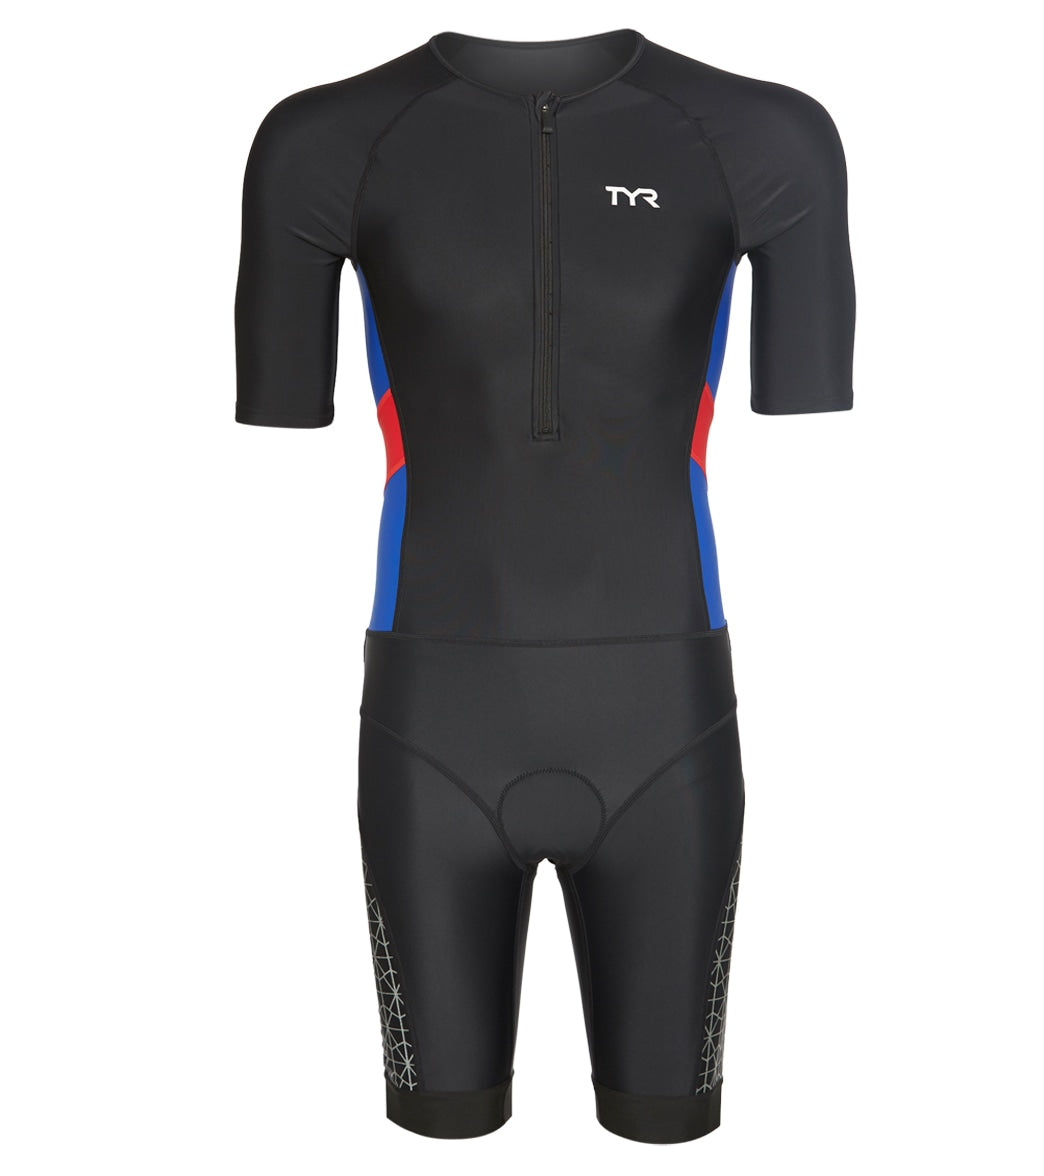 TYR Men's Competitor Speedsuit - Black/Blue/Red Small Size Small - Swimoutlet.com